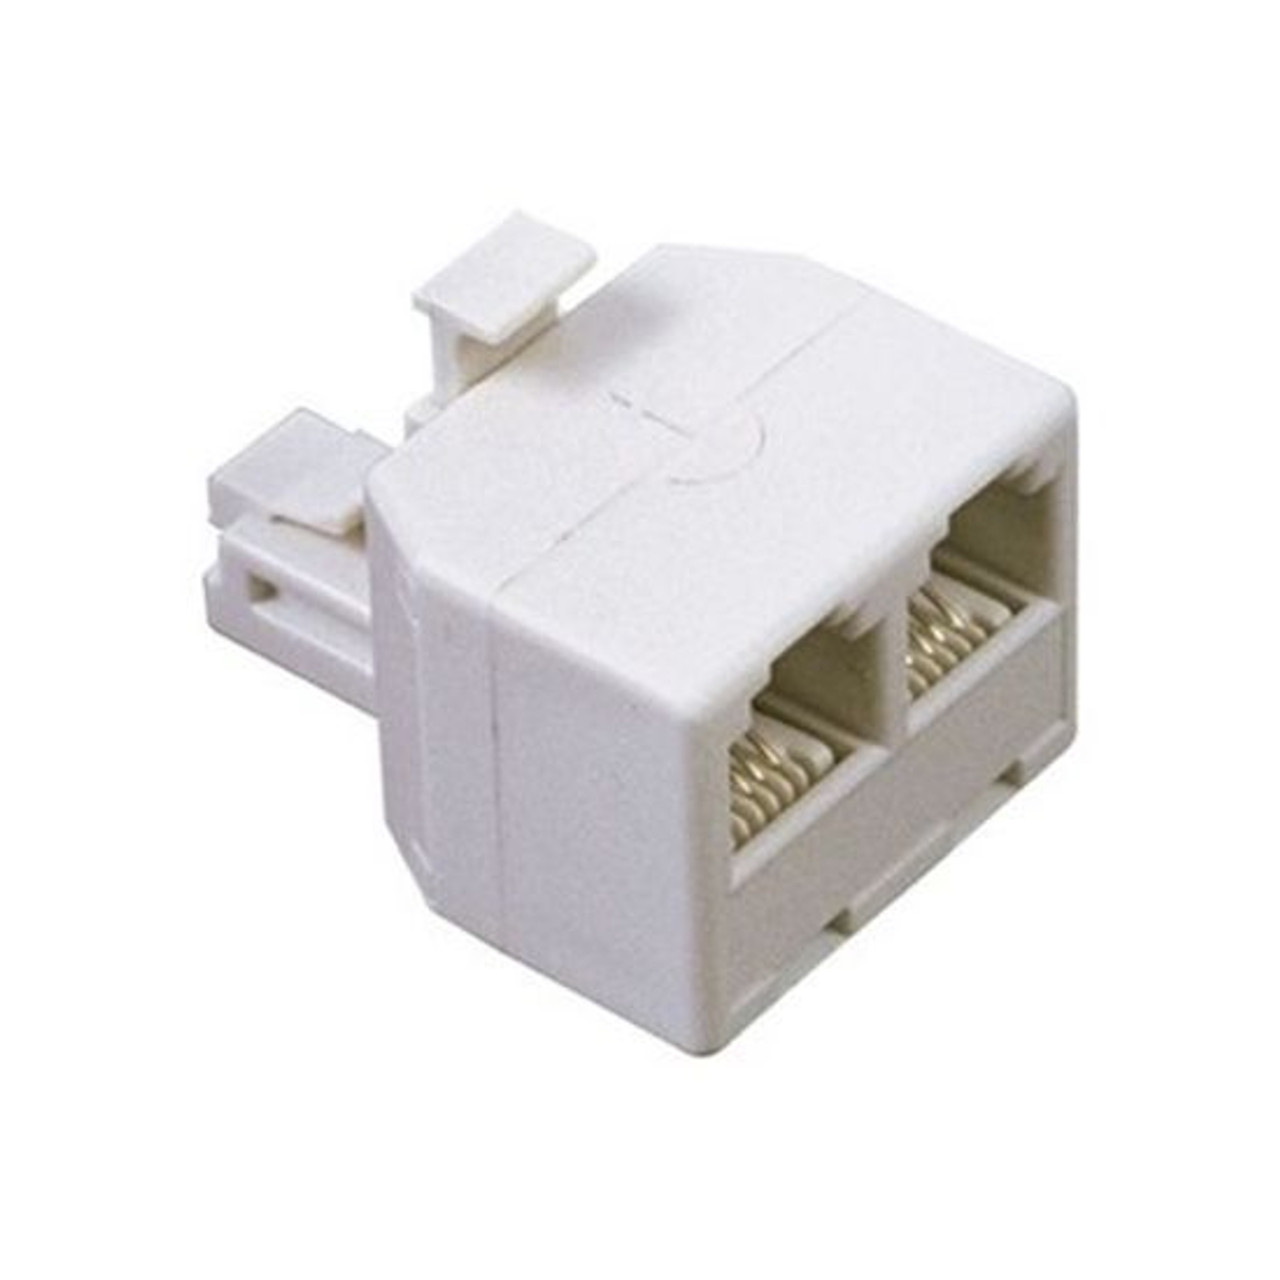 Steren 300-024WH 4-Conductor Telephone Adapter White 1-Plug 2-Jack TEE Adapter RJ11 2-Way RJ11 Modular Phone Wall Splitter Line Divider Dual Phone Cord Snap-In RJ-11 Jack, Part # 300024-WH